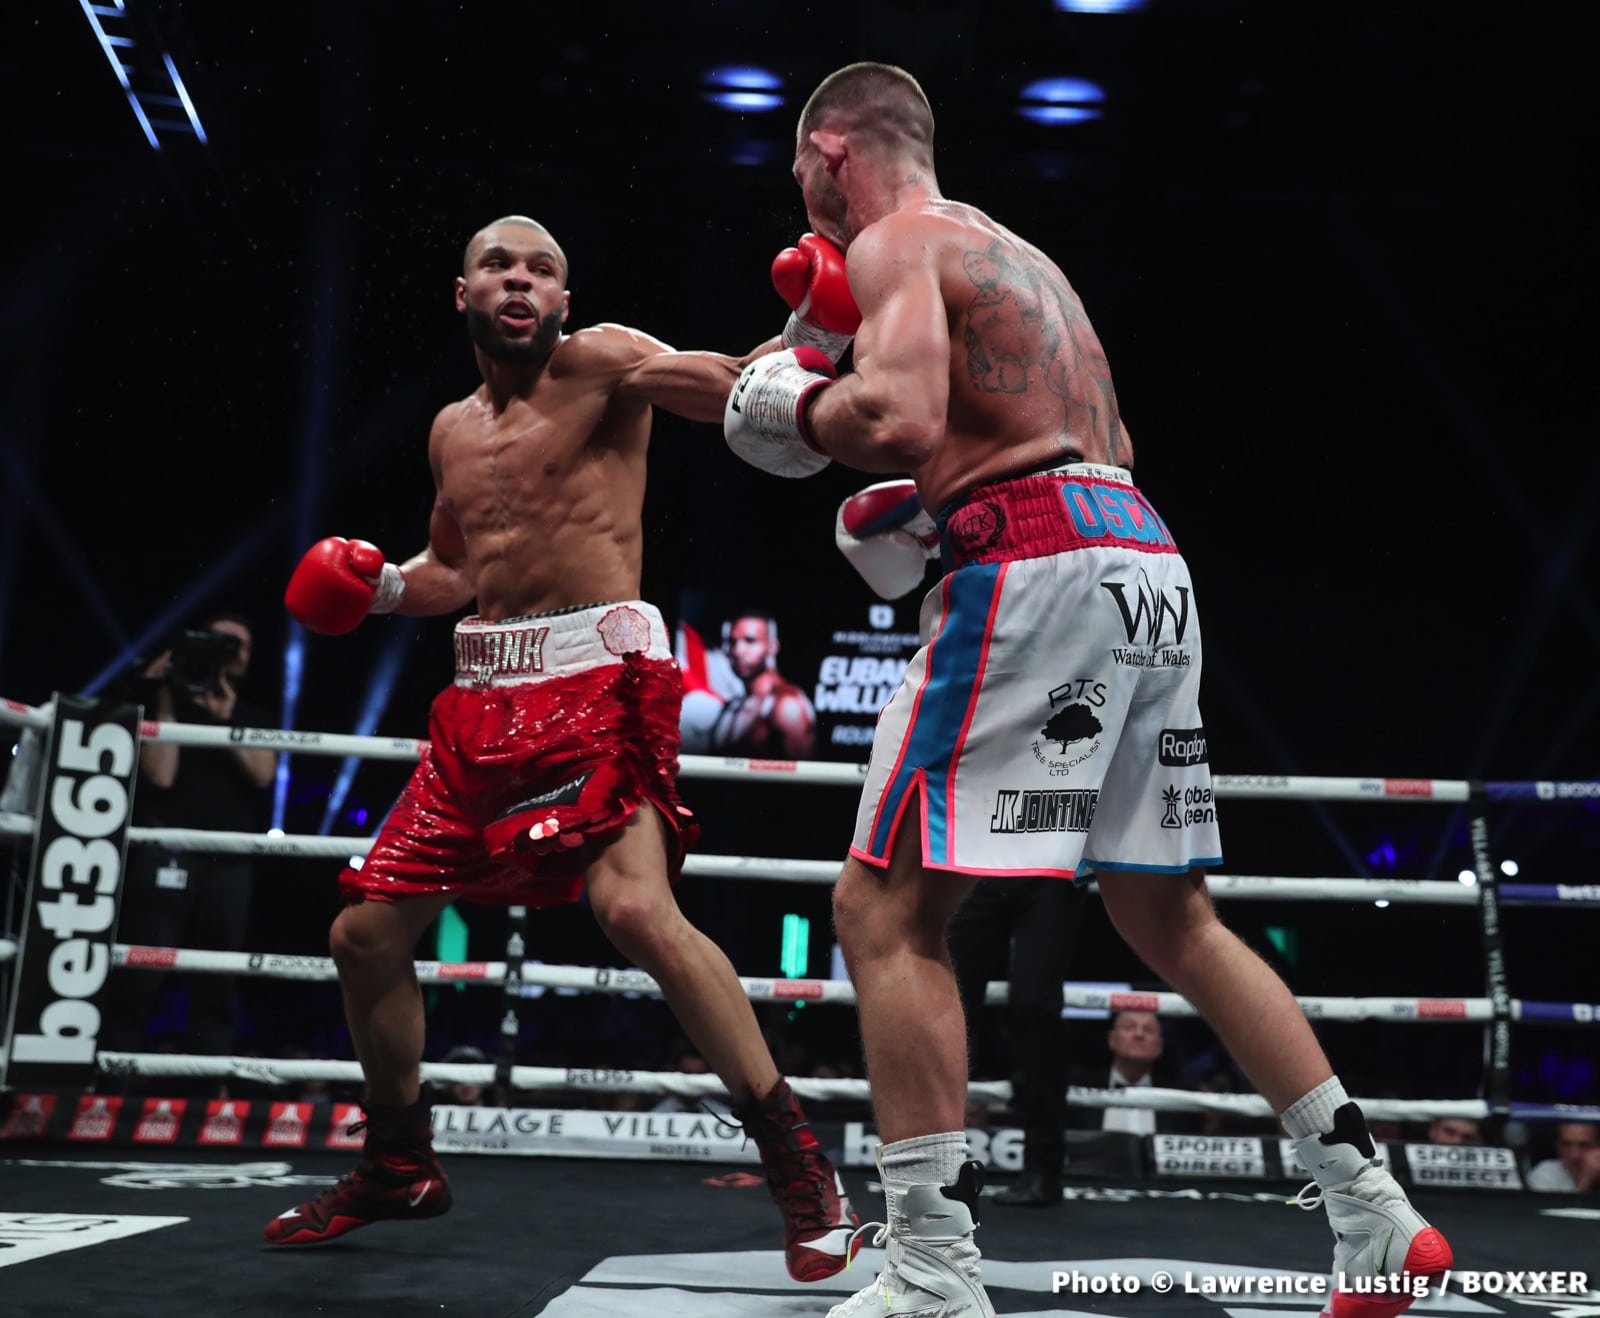 Billy Joe Saunders Wants Rematch With Eubank Jr: “I Think He's Got Worse If I'm Honest”